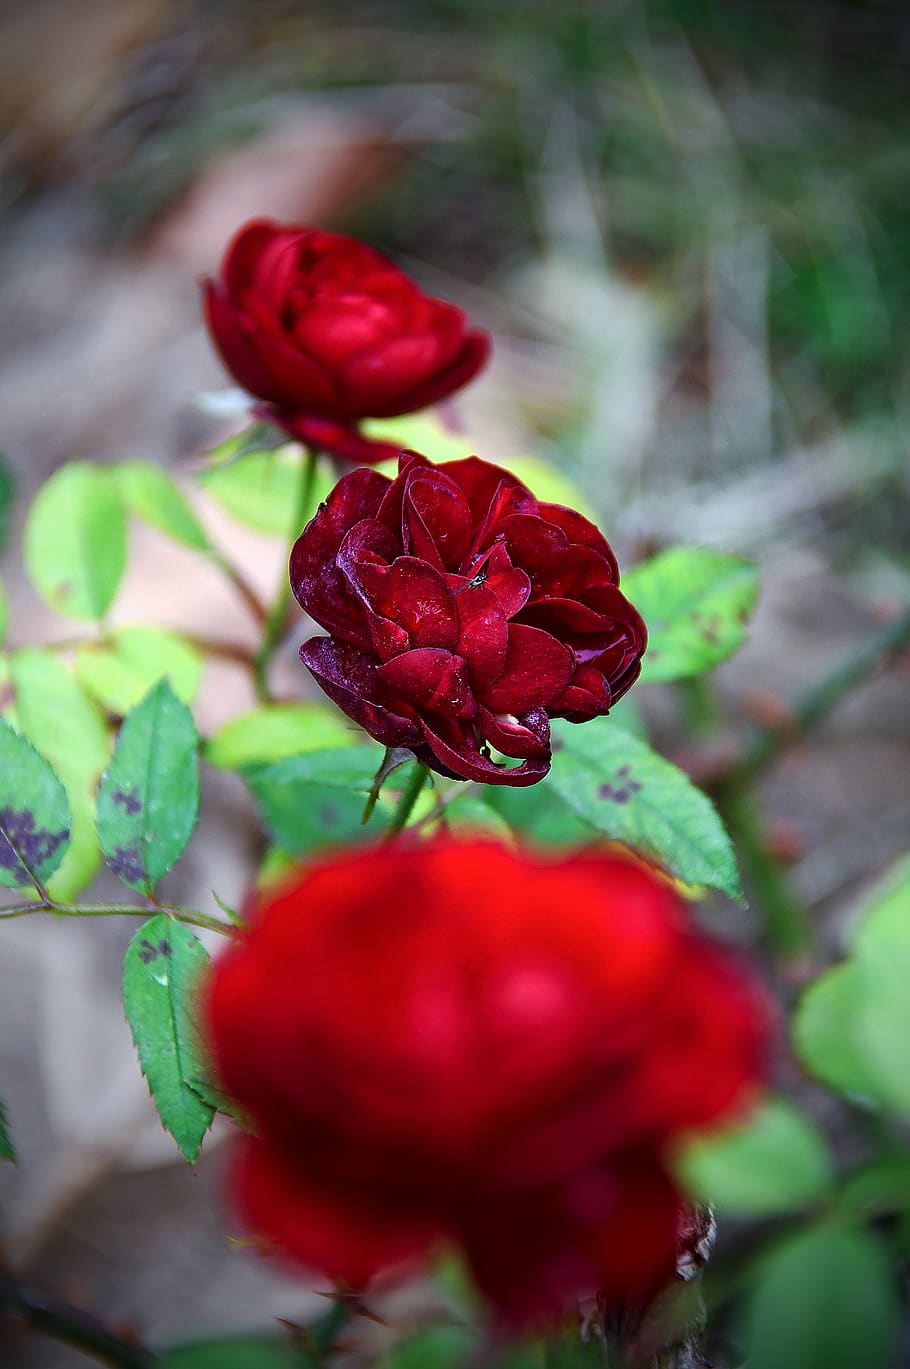 red, rose, love, romanticism, flower, autumn rose, beauty, red rose, scent, petals